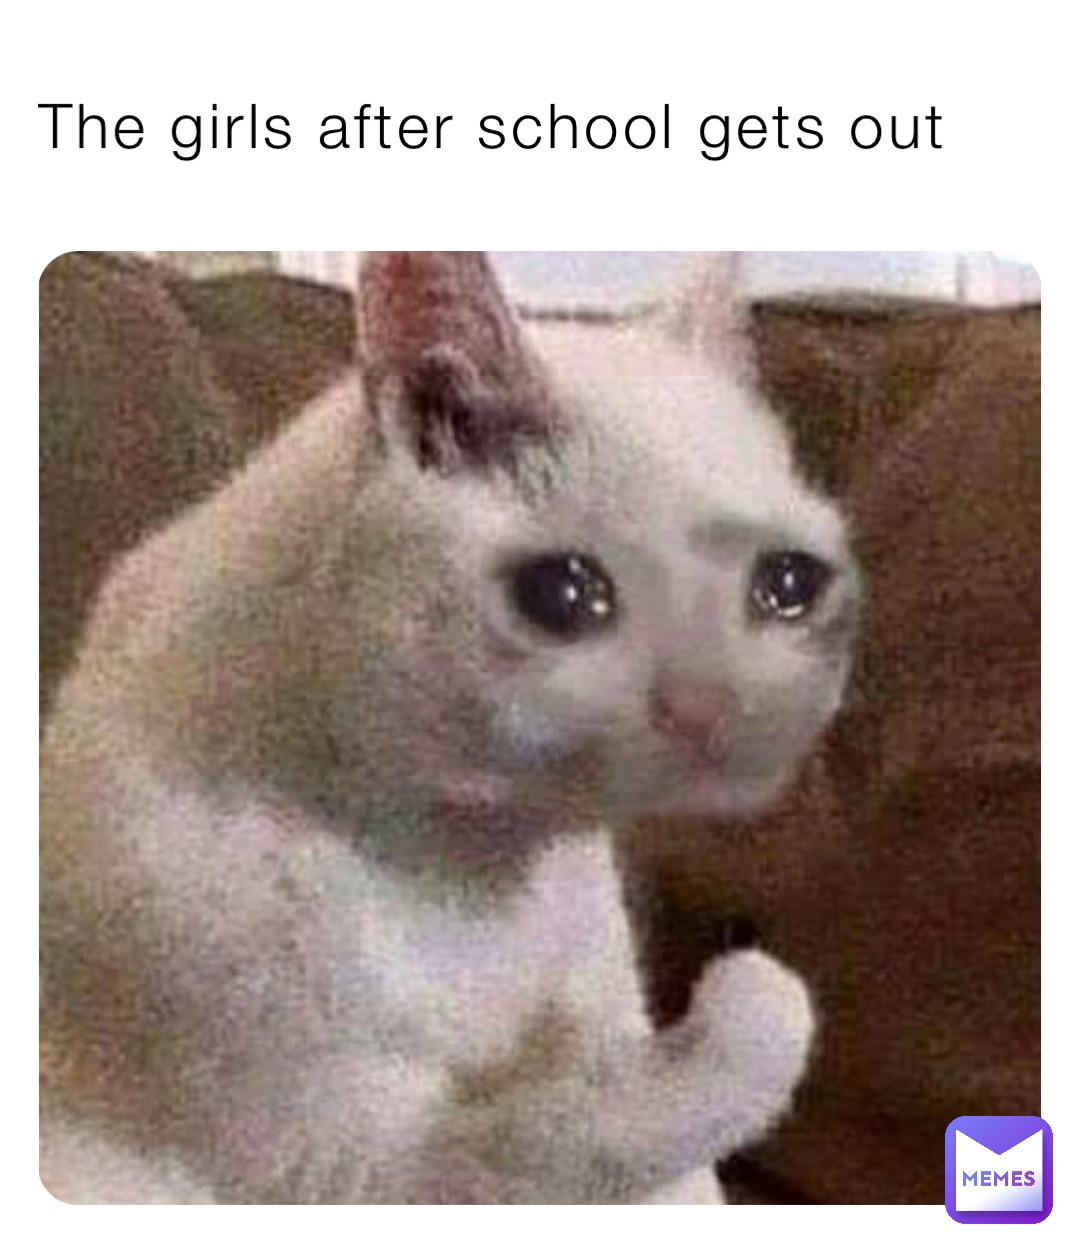 The girls after school gets out